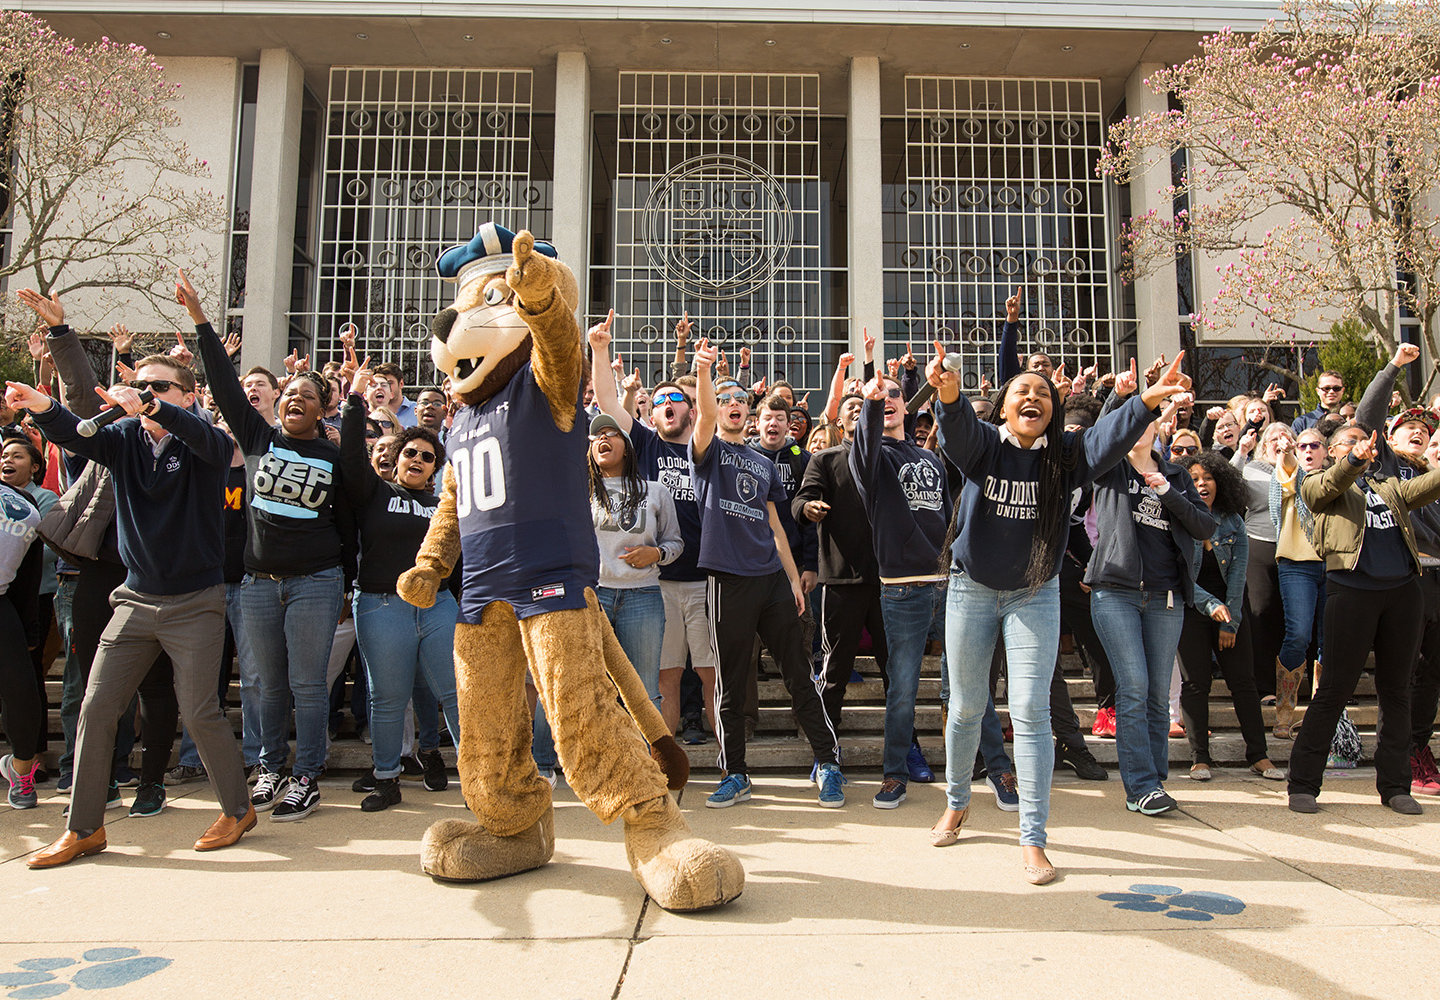 ODU students cheering with Big Blue mascot